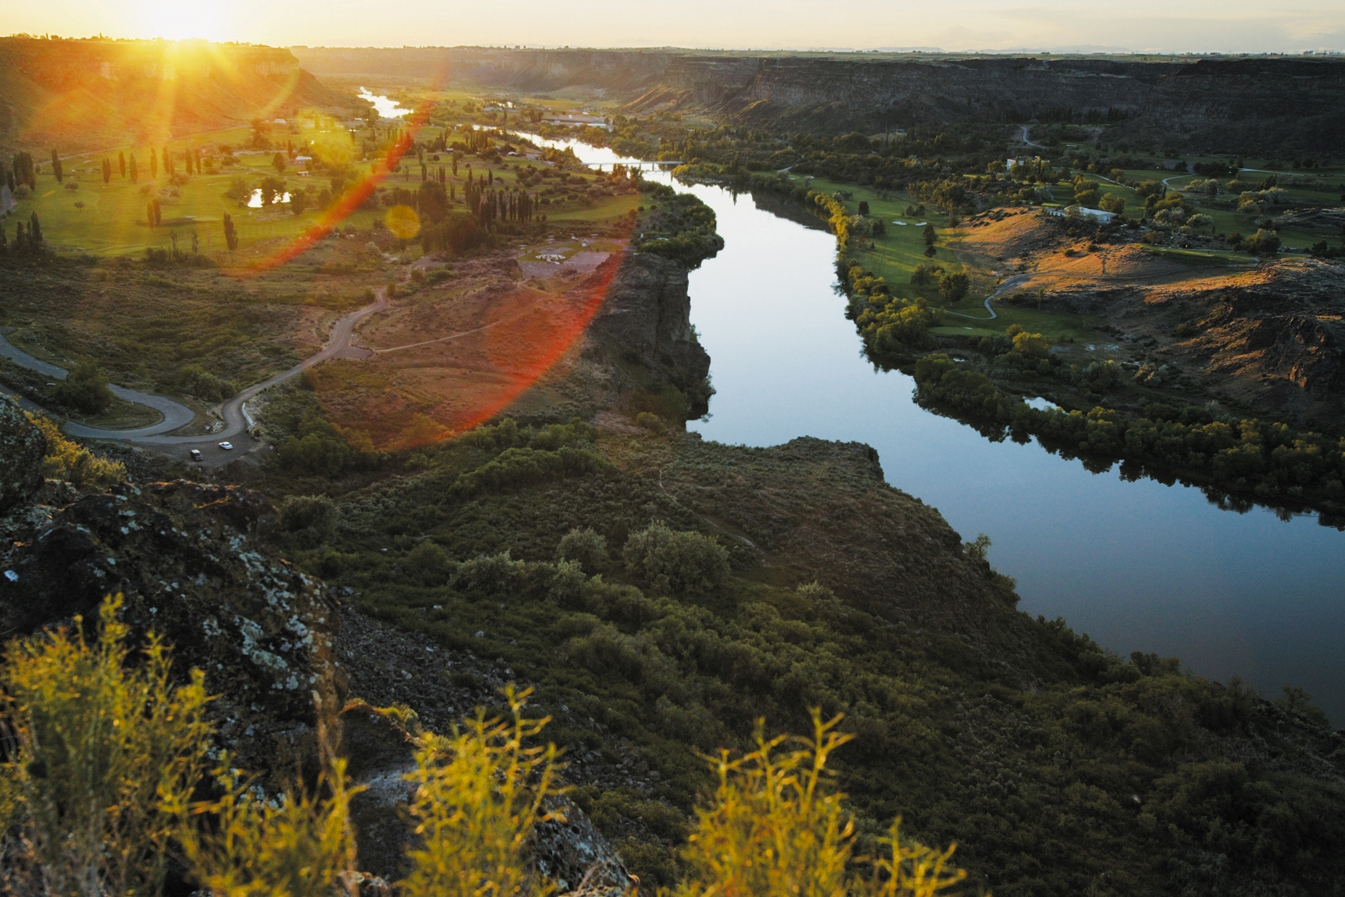 The mighty Snake River and its magnificent canyon etch the boundaries of Southern Idaho’s communities.